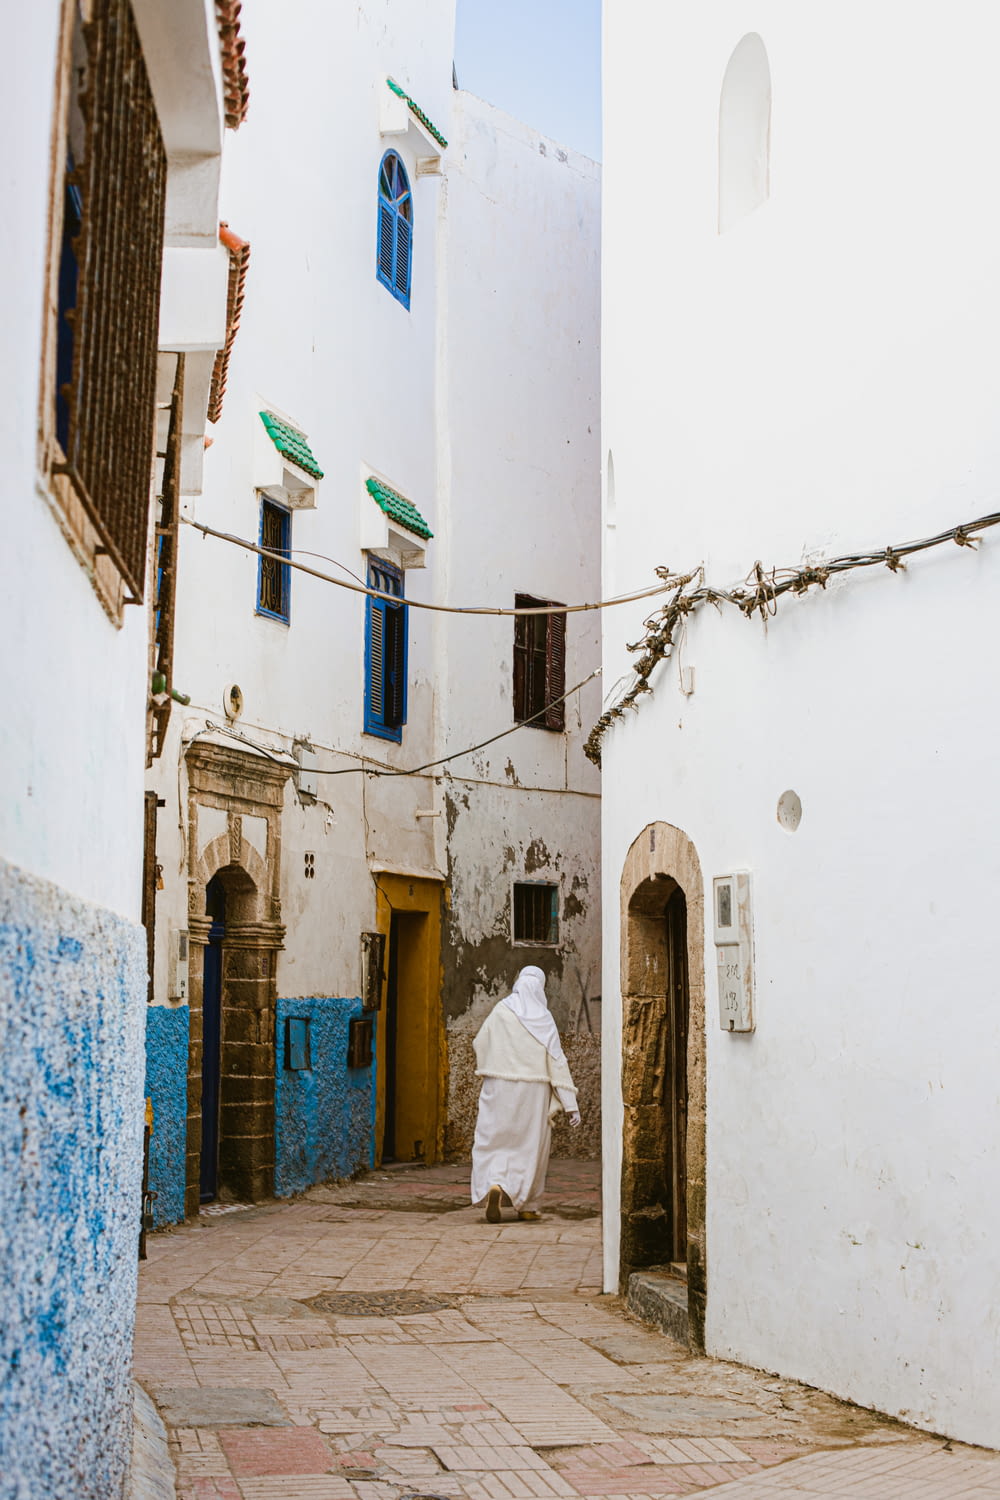 a person in a white robe walking down a street